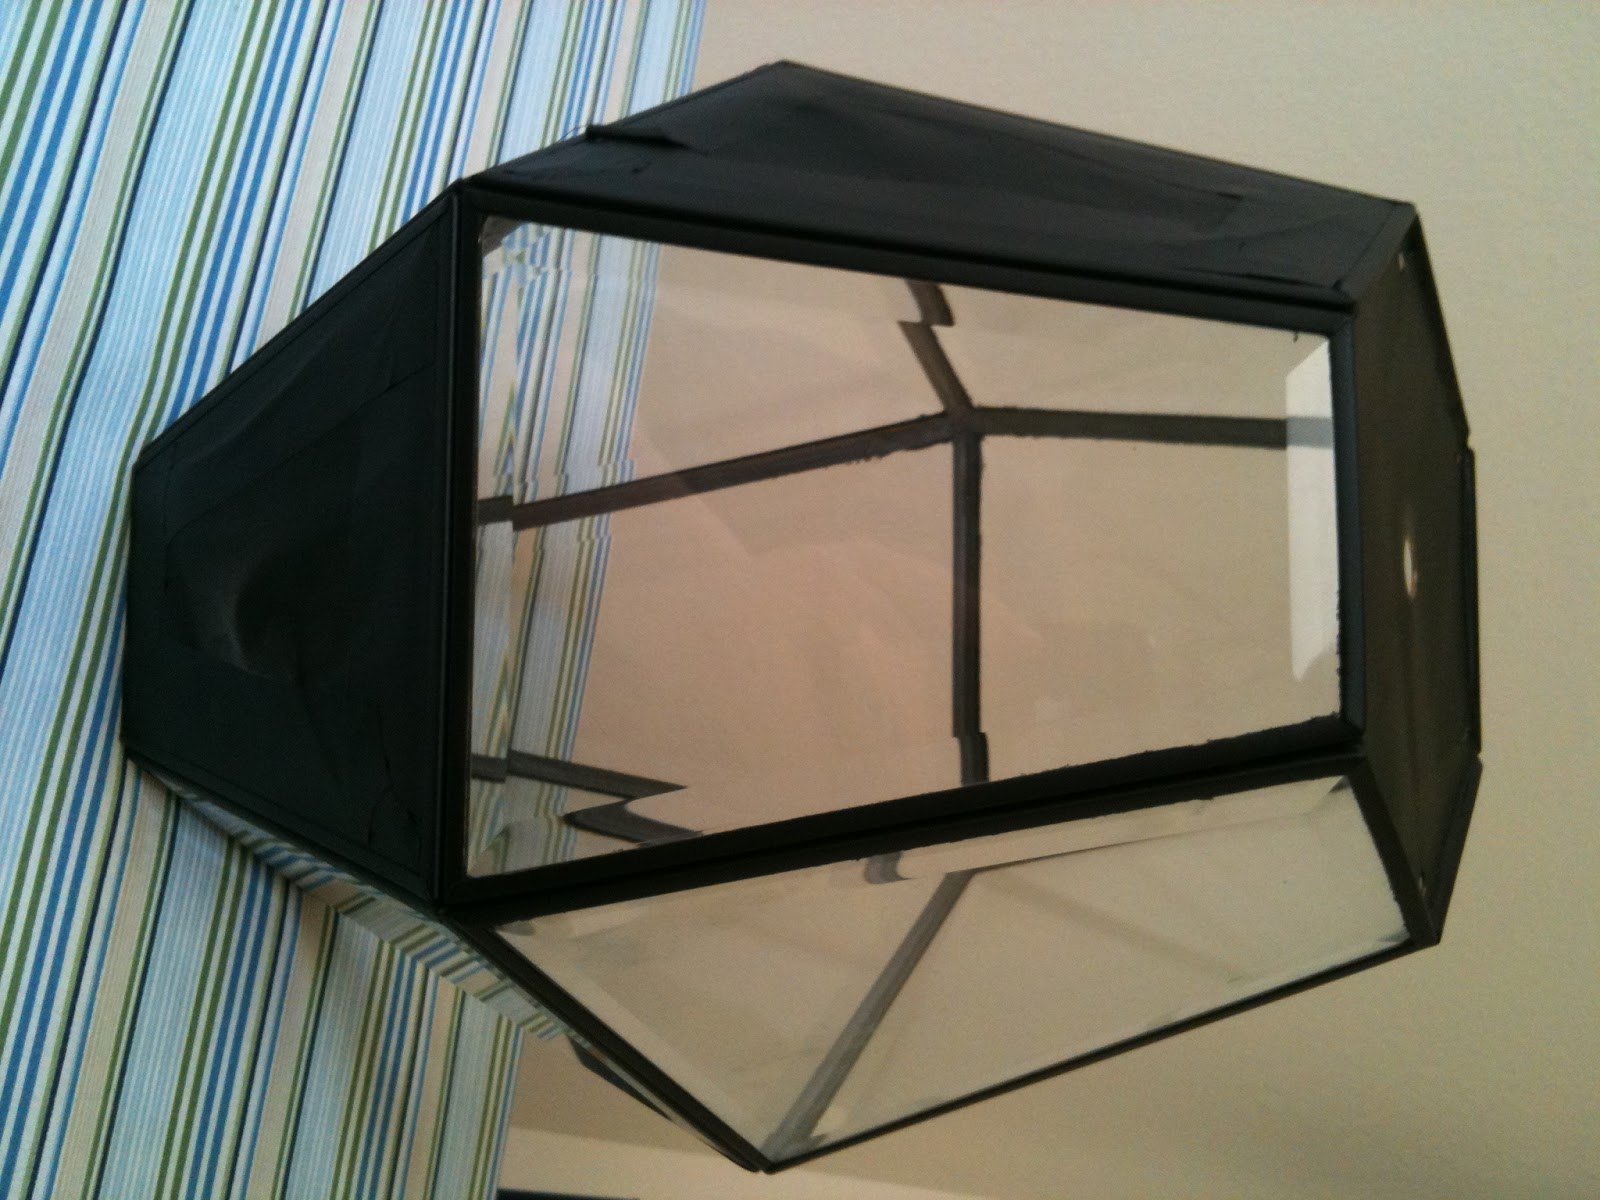 Ambrosia's Creations: Upcycled Outdoor Light